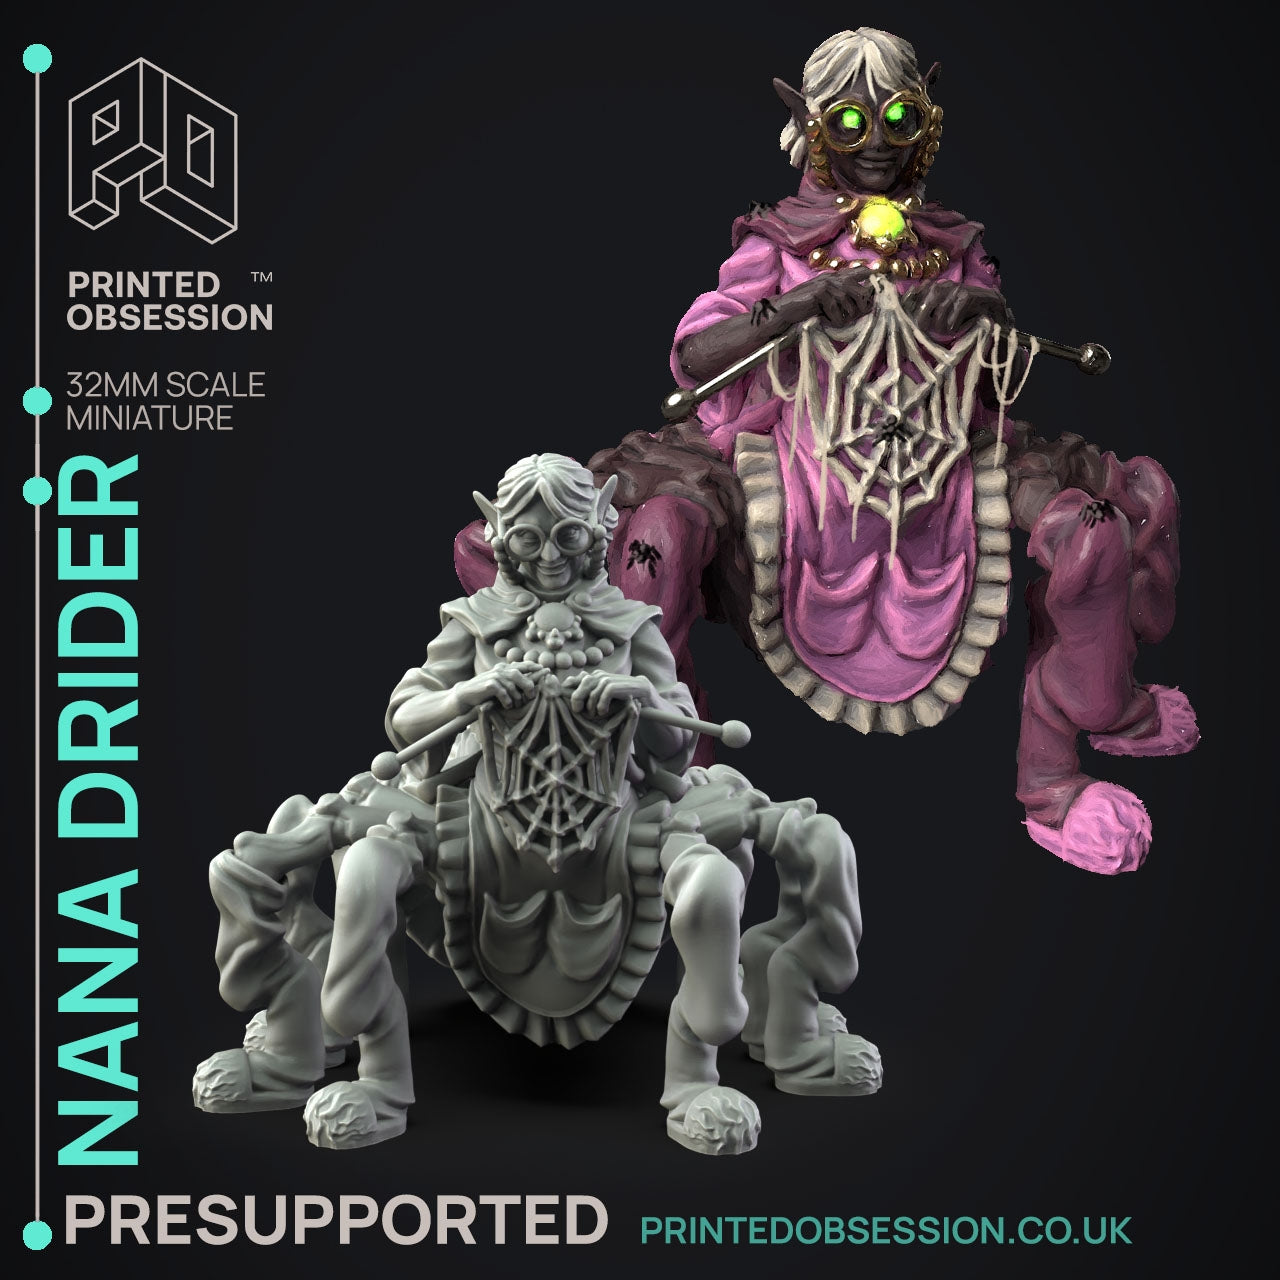 Nana Drider Dungeon Cleaning Inc. - The Printed Obsession - Table-top mini, 3D Printed Collectable for painting and playing!